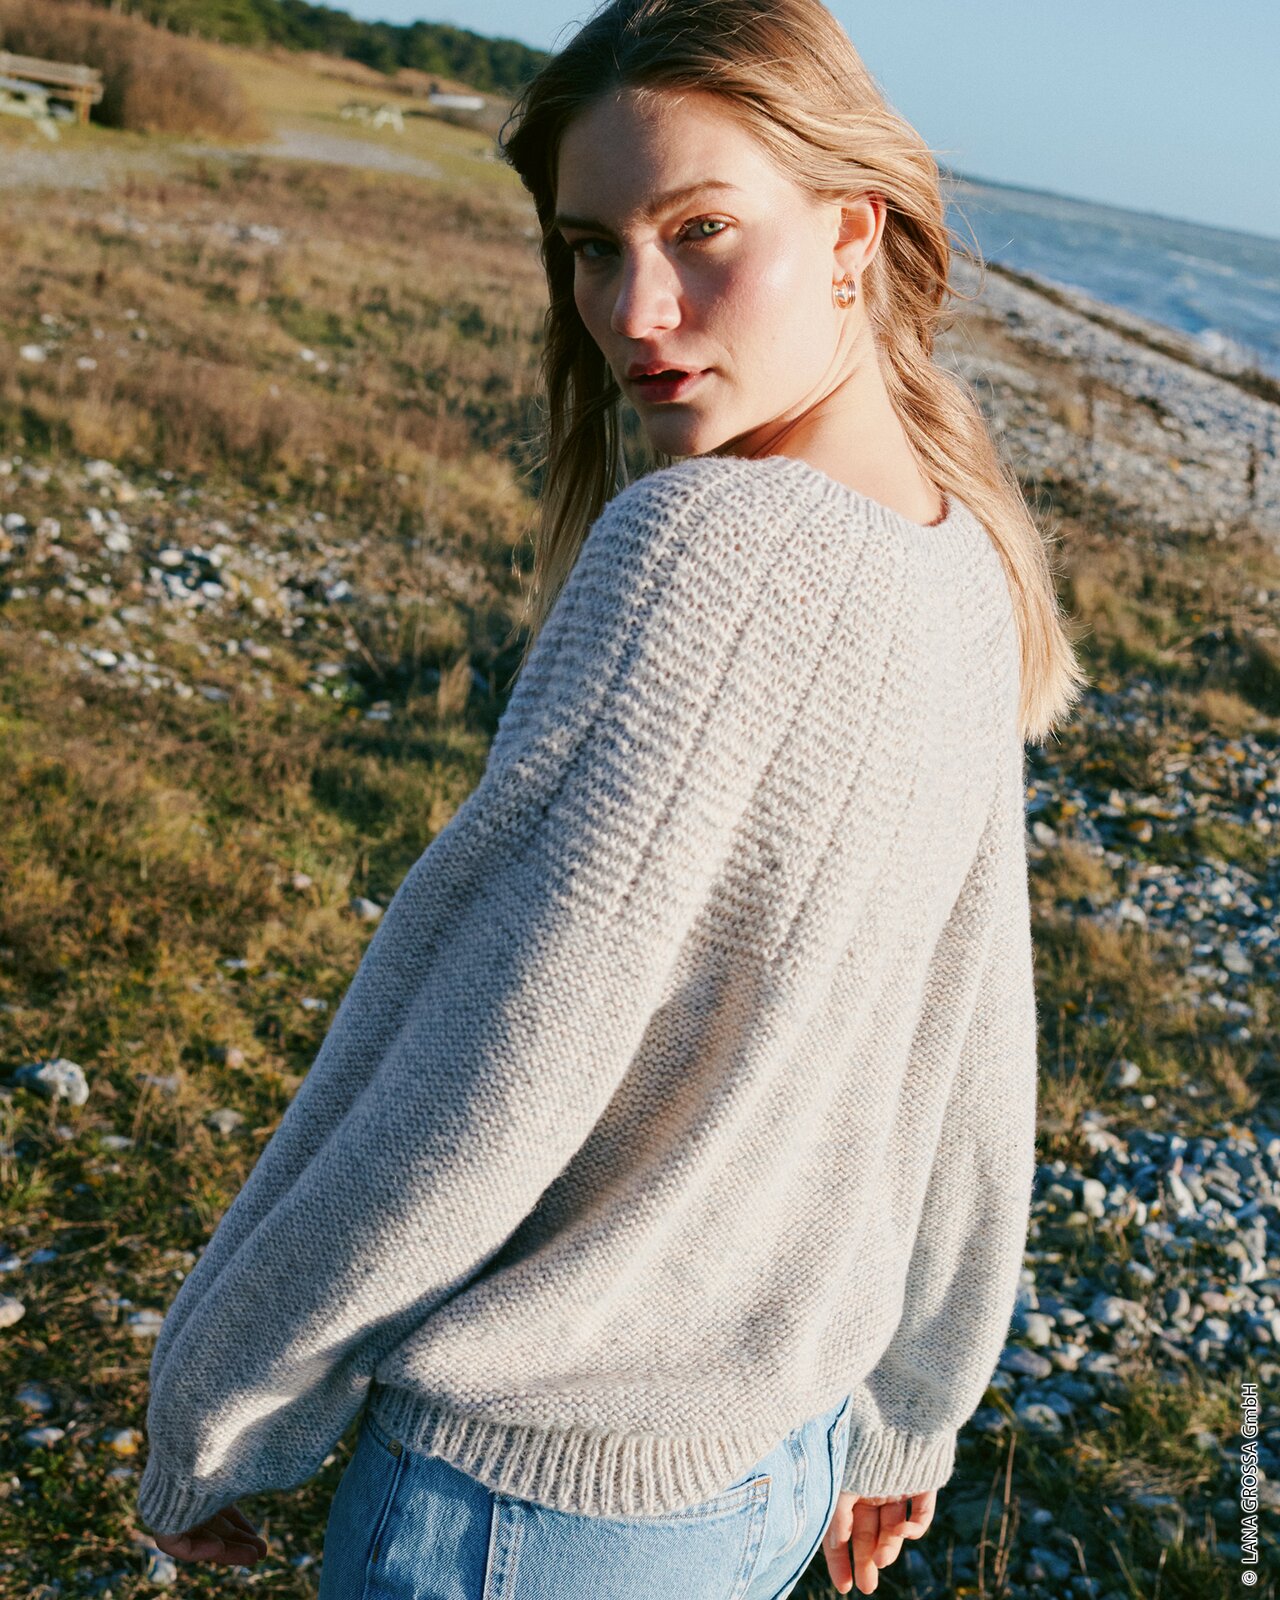 Models – ROUND-FIT SWEATER IN TWO PATTERNS - Ecopuno – LANA GROSSA